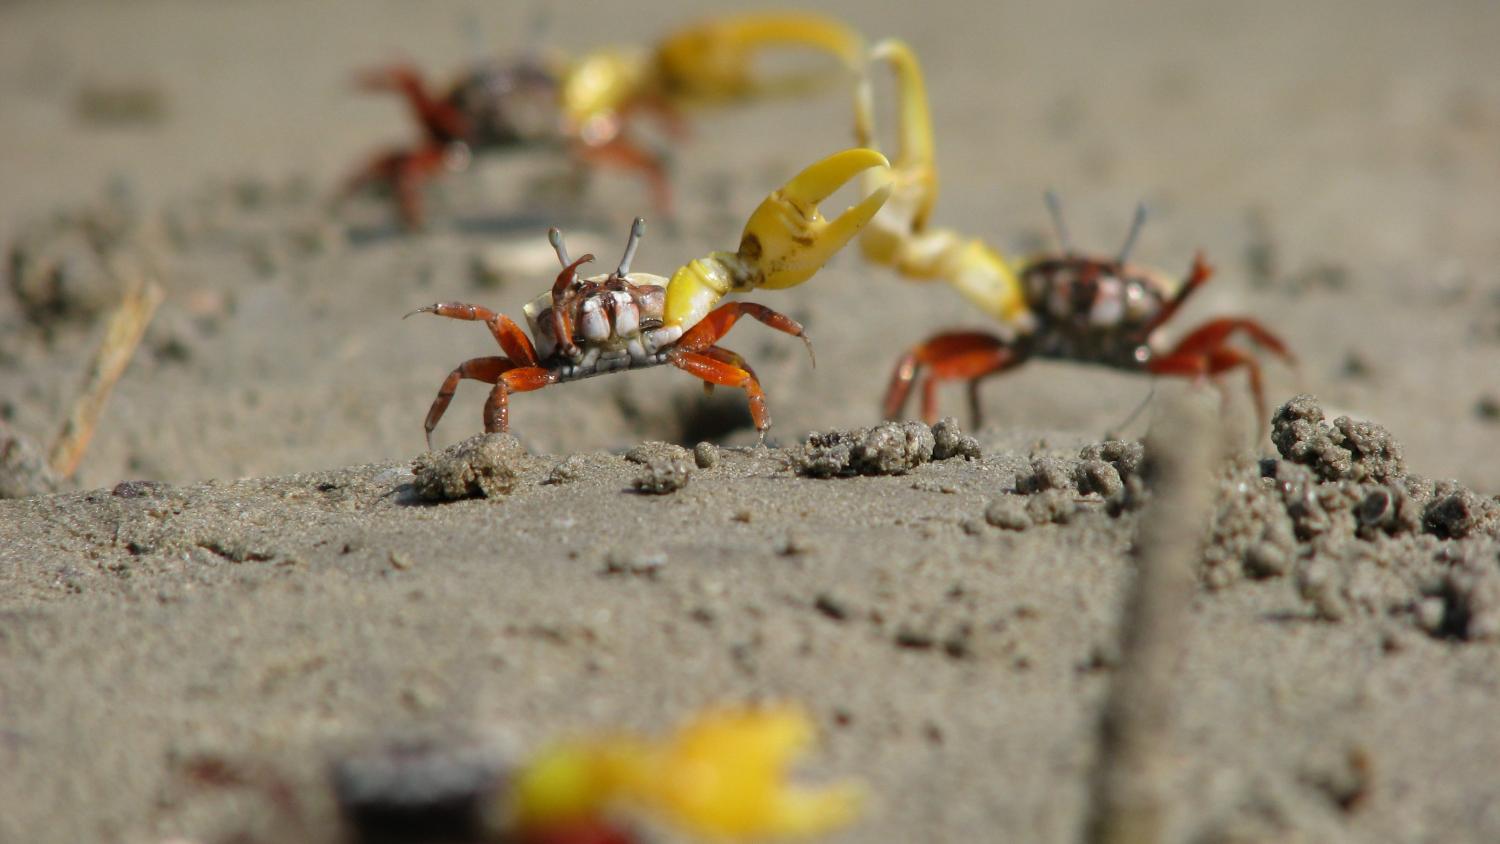 Female fiddler crabs want protection not sex